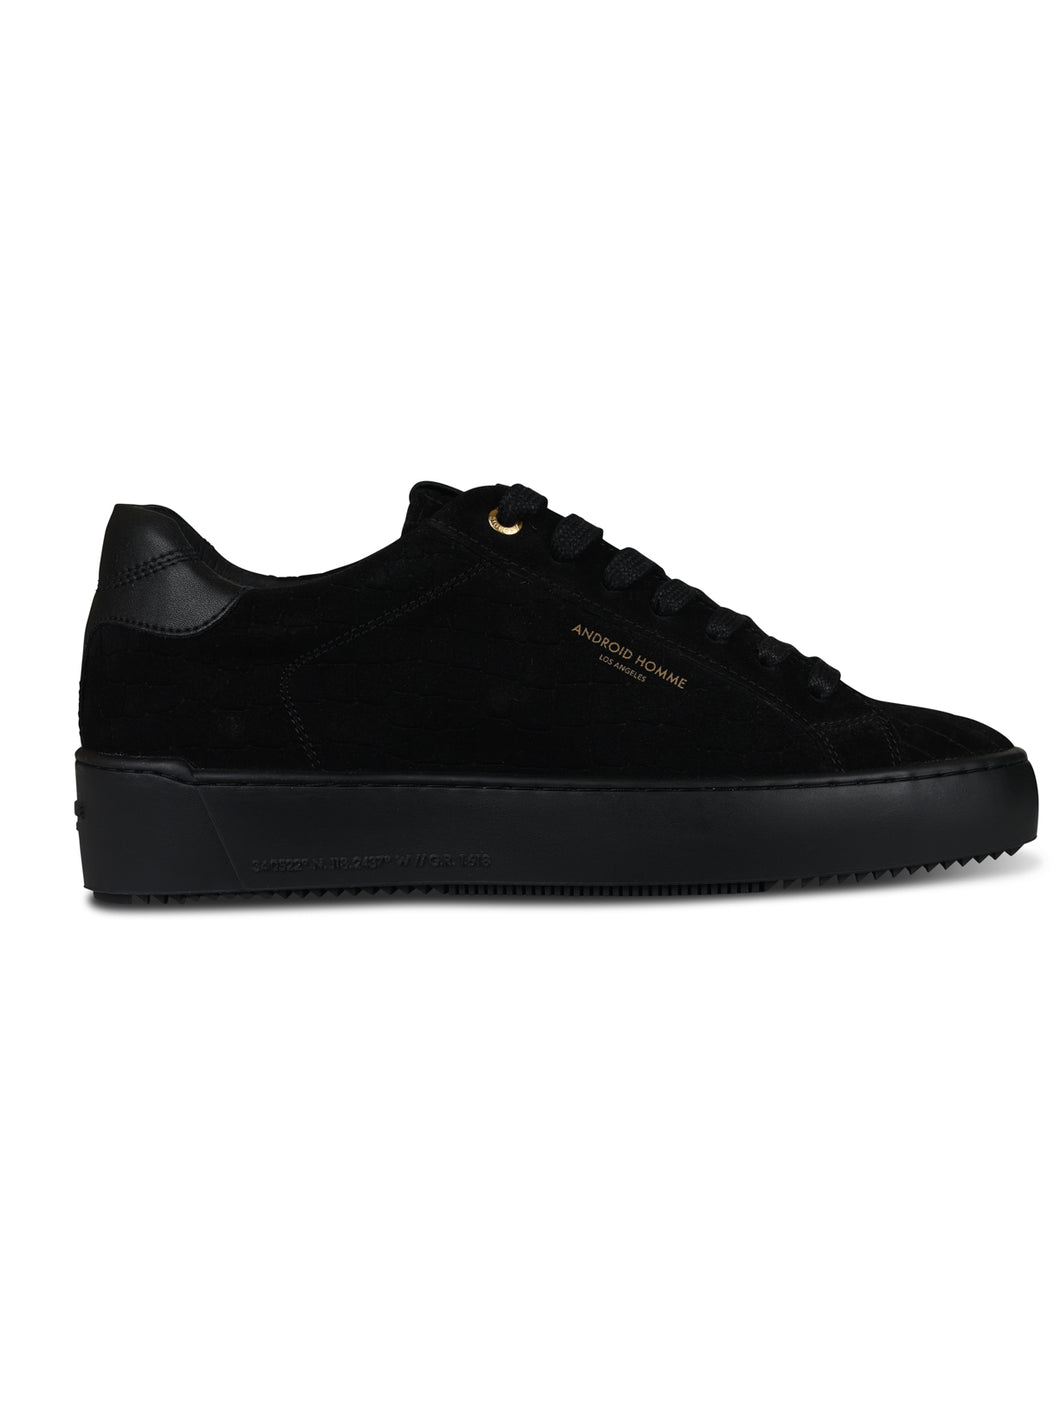 Android Homme Zuma Suede Croc Black